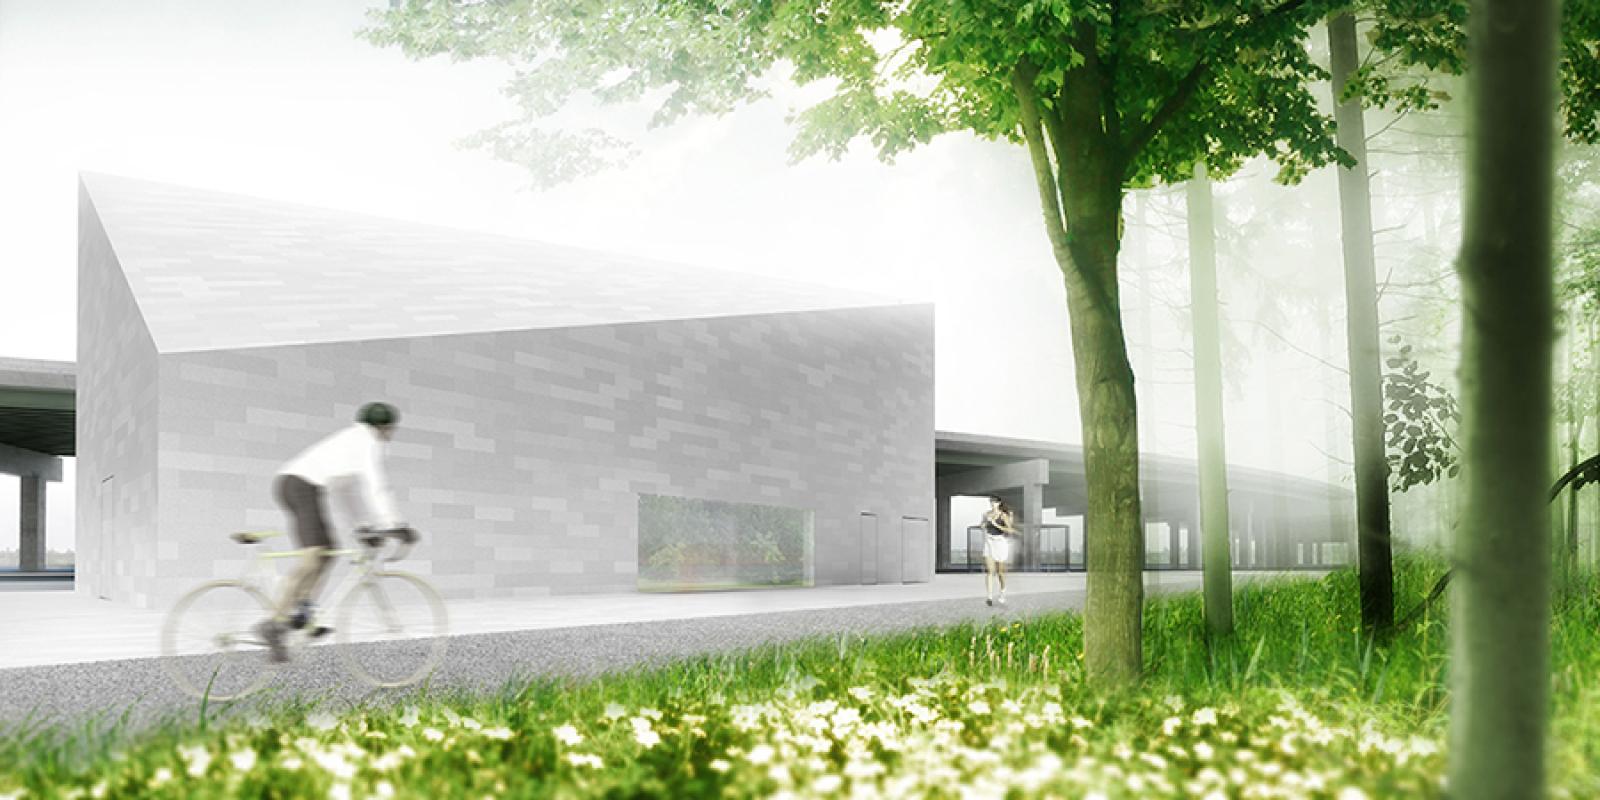 A rendering of a cyclist passing the new Cherry Street Stormwater Facility